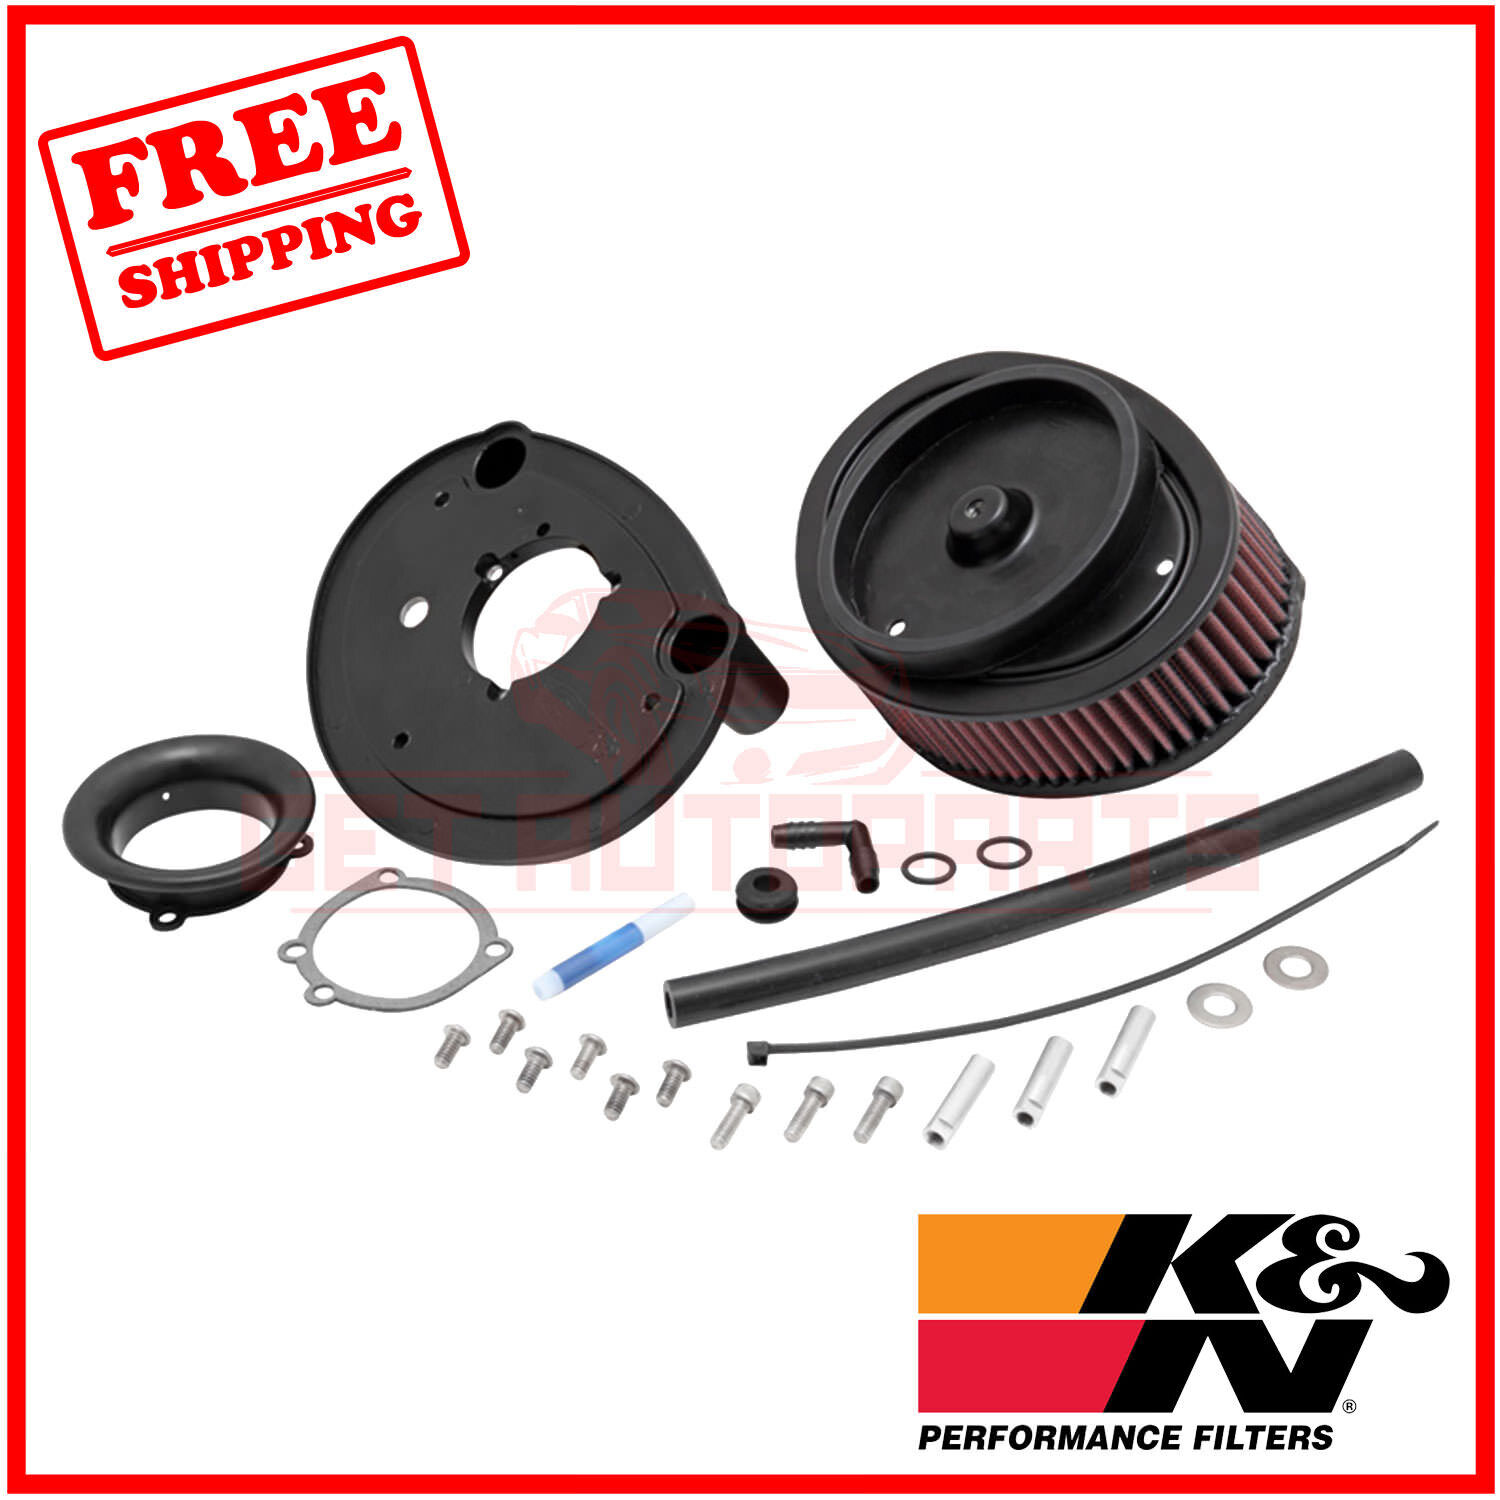 K&N Intake System fits with Harley D. FLSTSCI Softail Springer Classic 2005-06